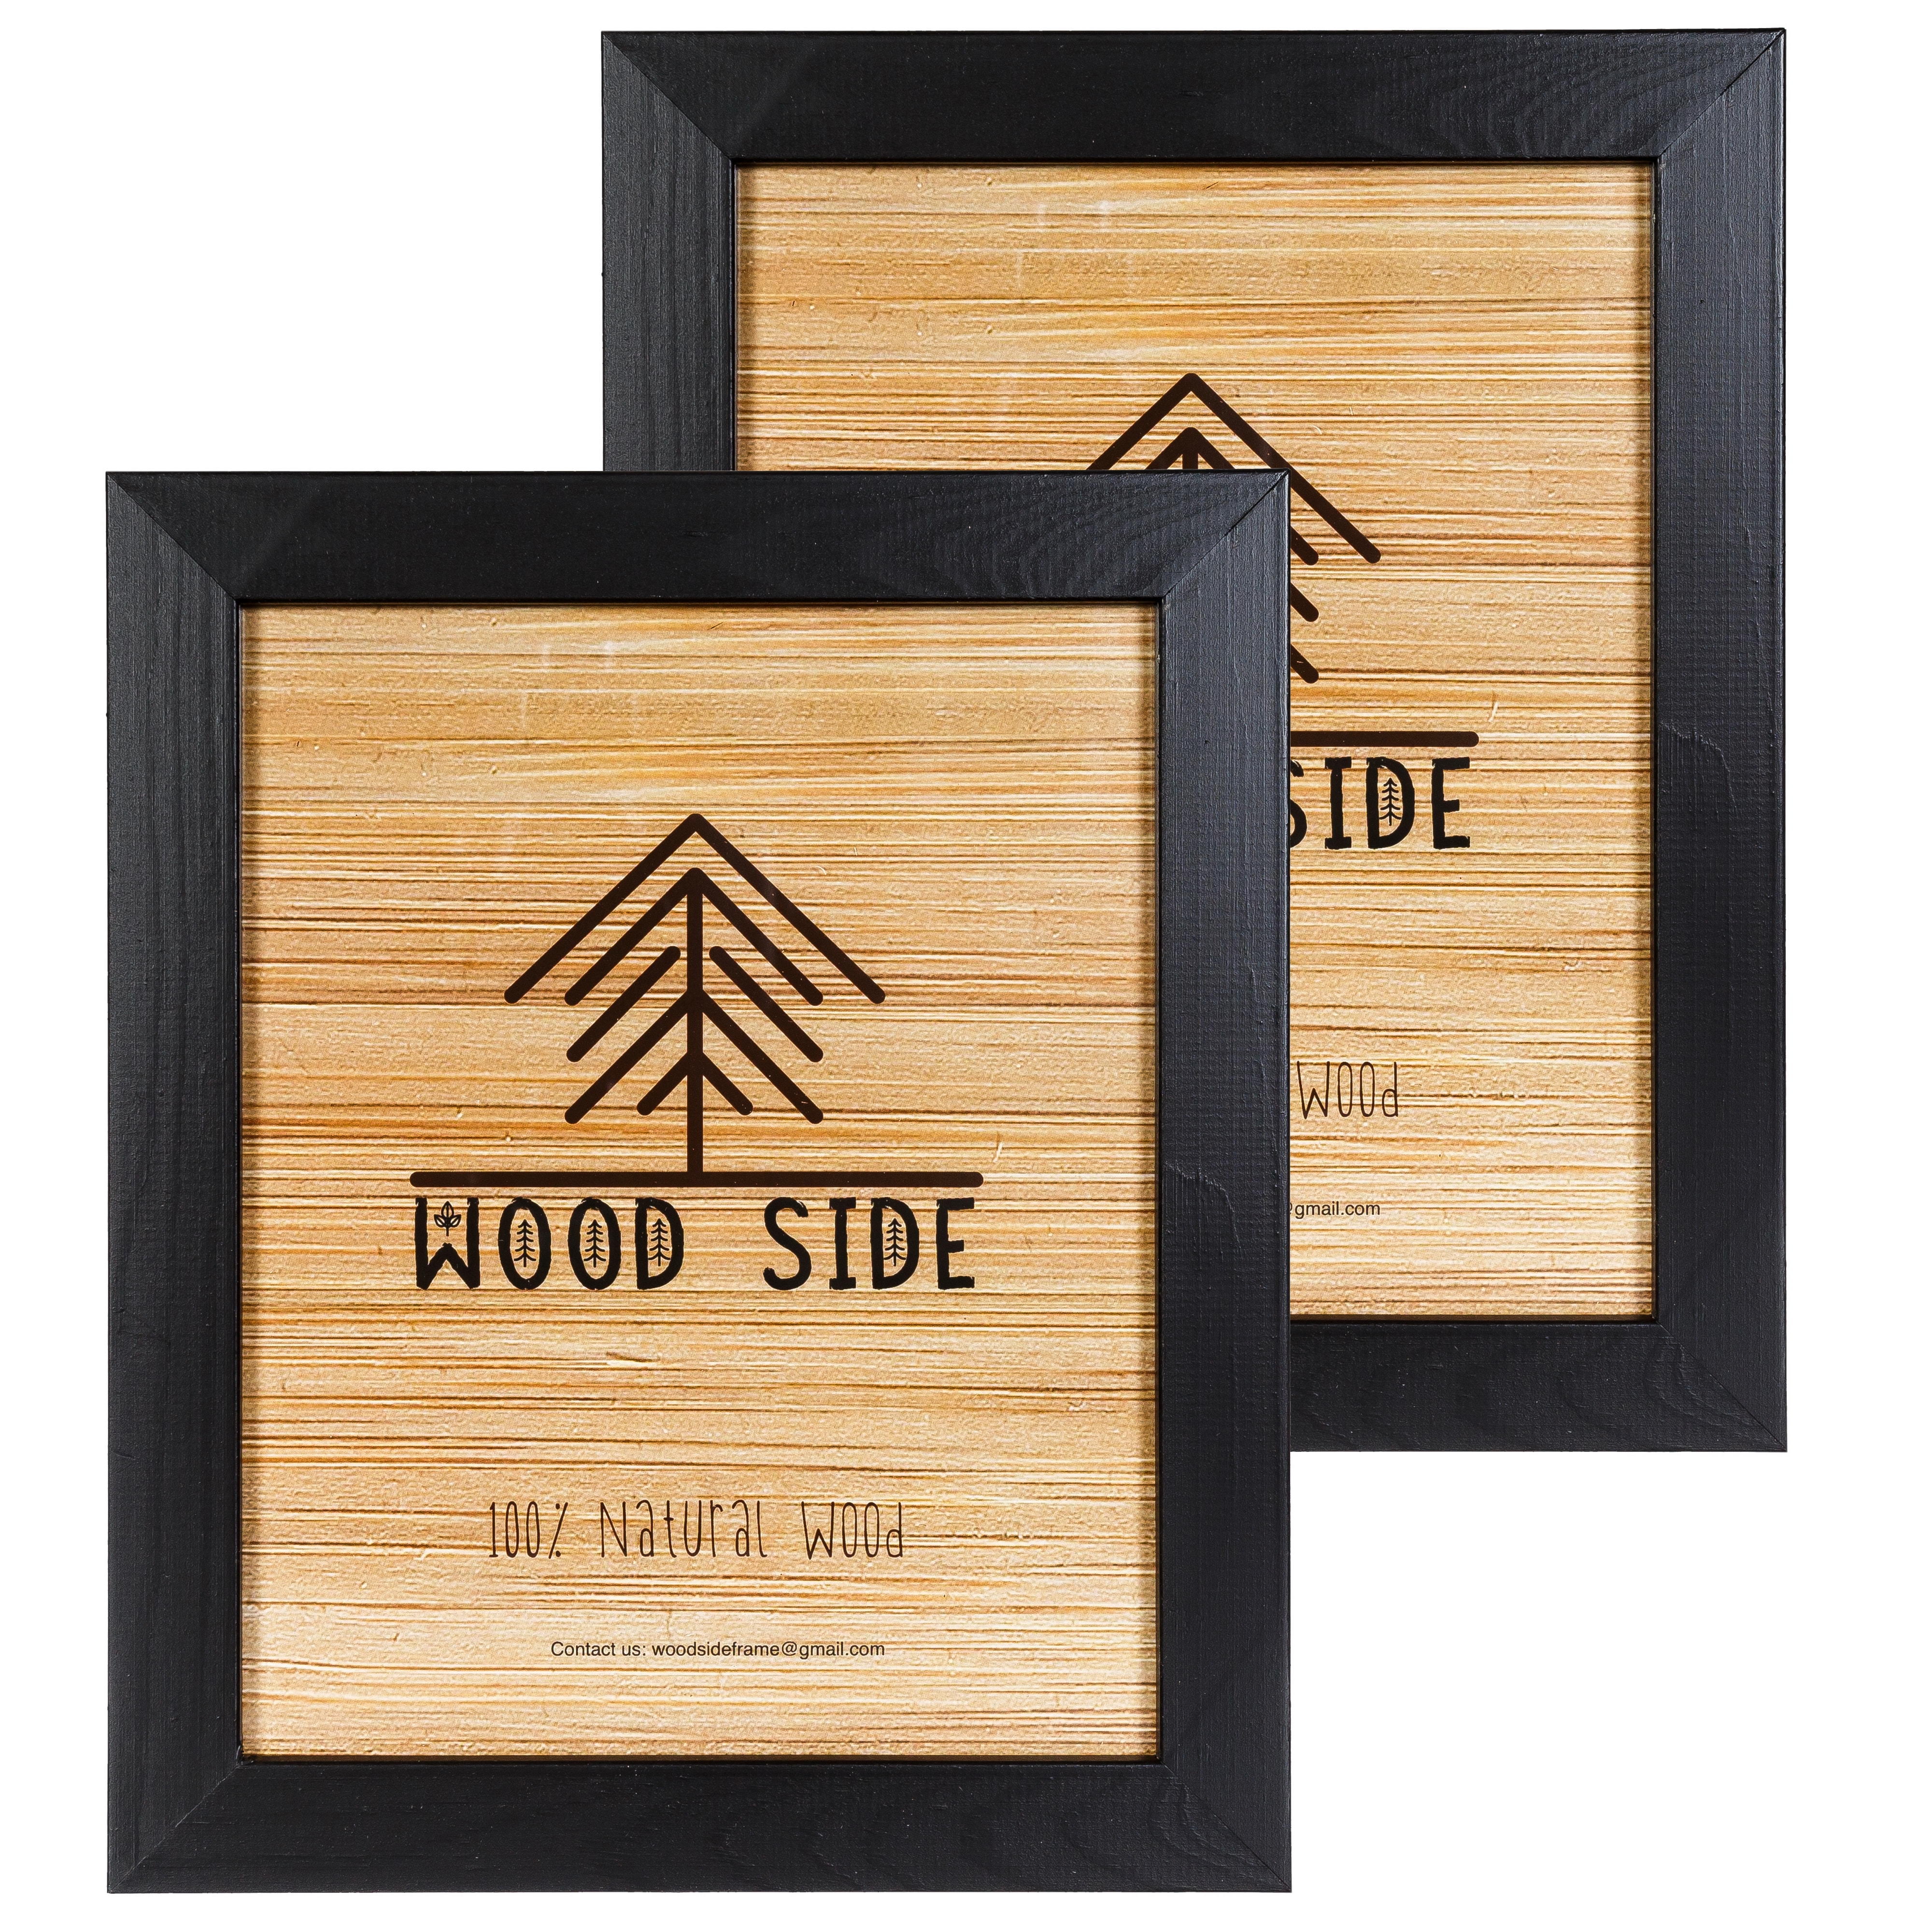 Rustic Wooden Picture Frame 8x10 - Black - Set of 2 - 100% Natural